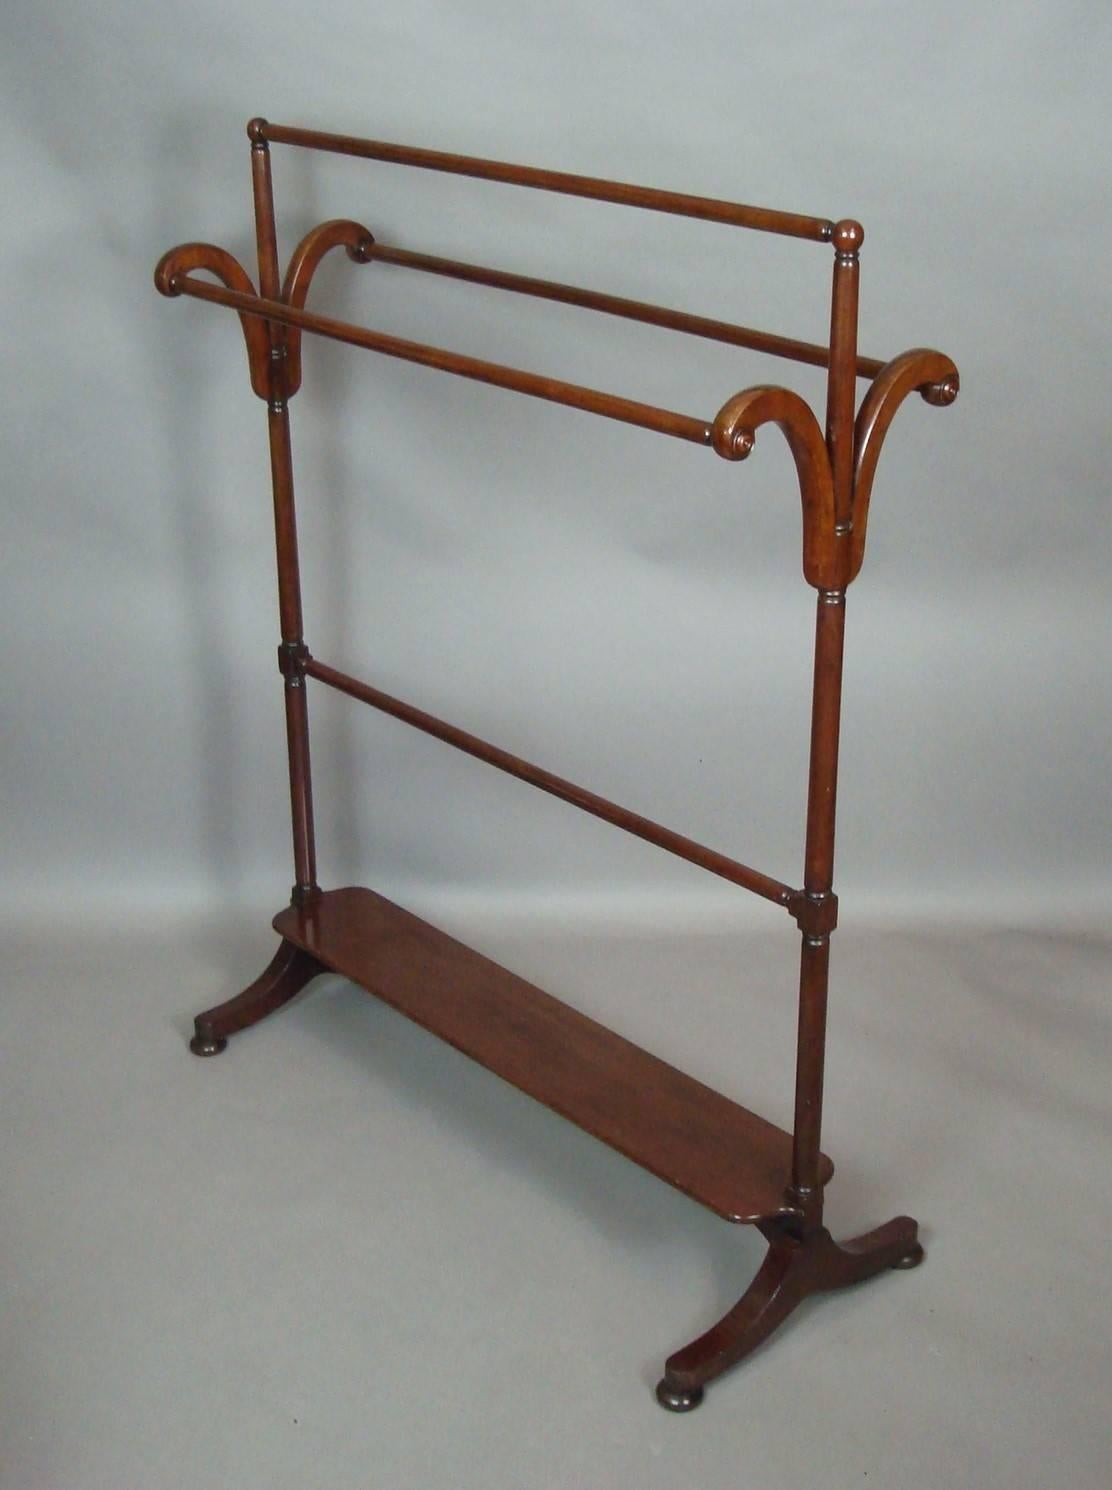 A late Regency mahogany clothes/towel rail, of large proportions. The turned top rail with ball finials above scrolled brackets with reeded roundels supporting two further rails on turned uprights. Having the unusual feature of useful bottom shelf,